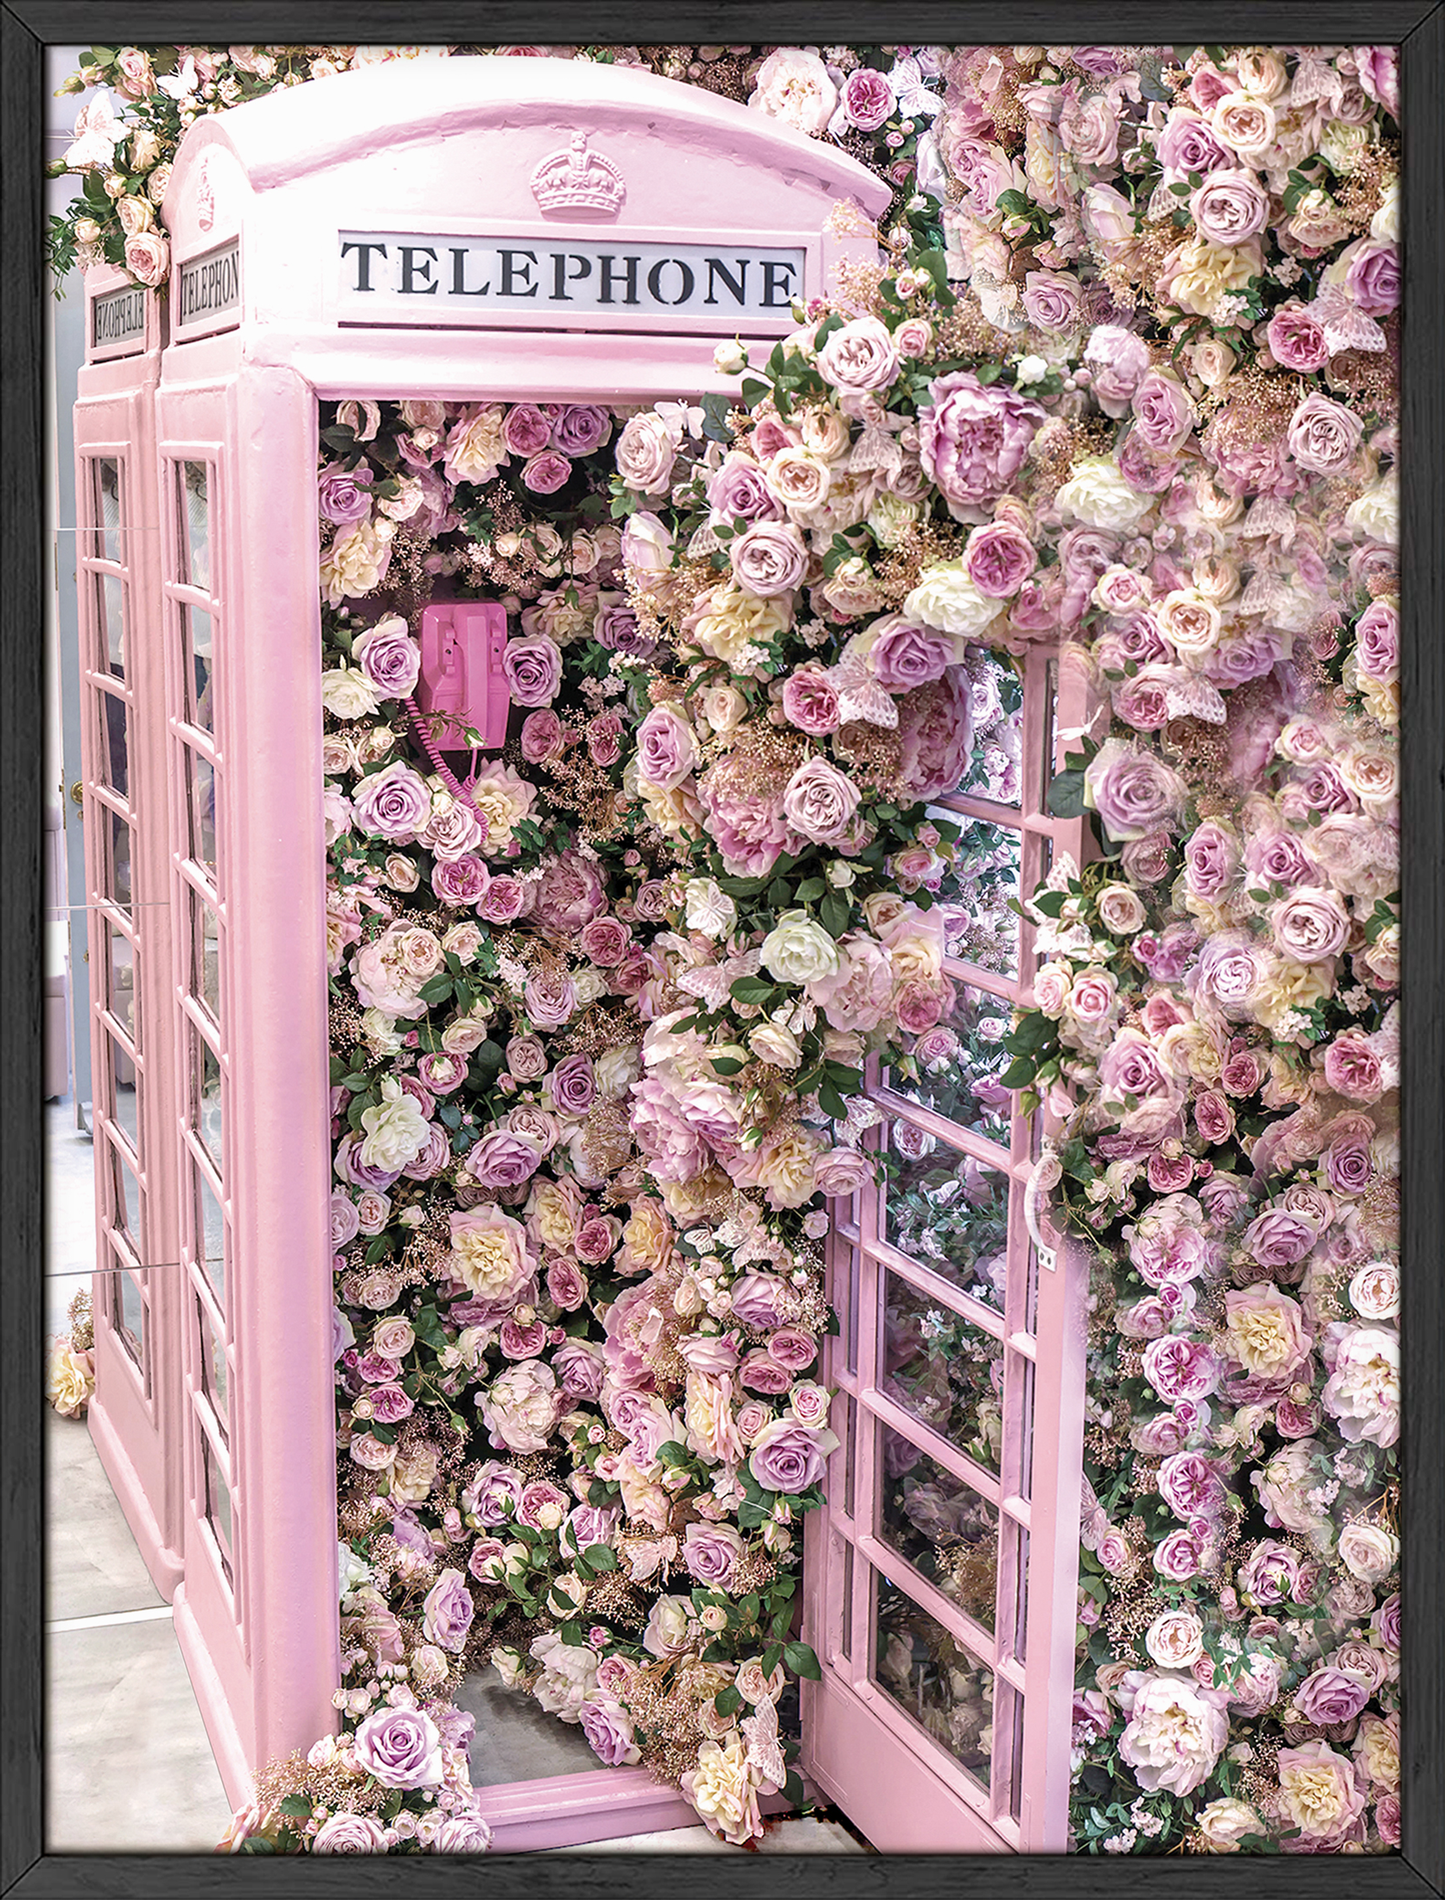 Phone Booth